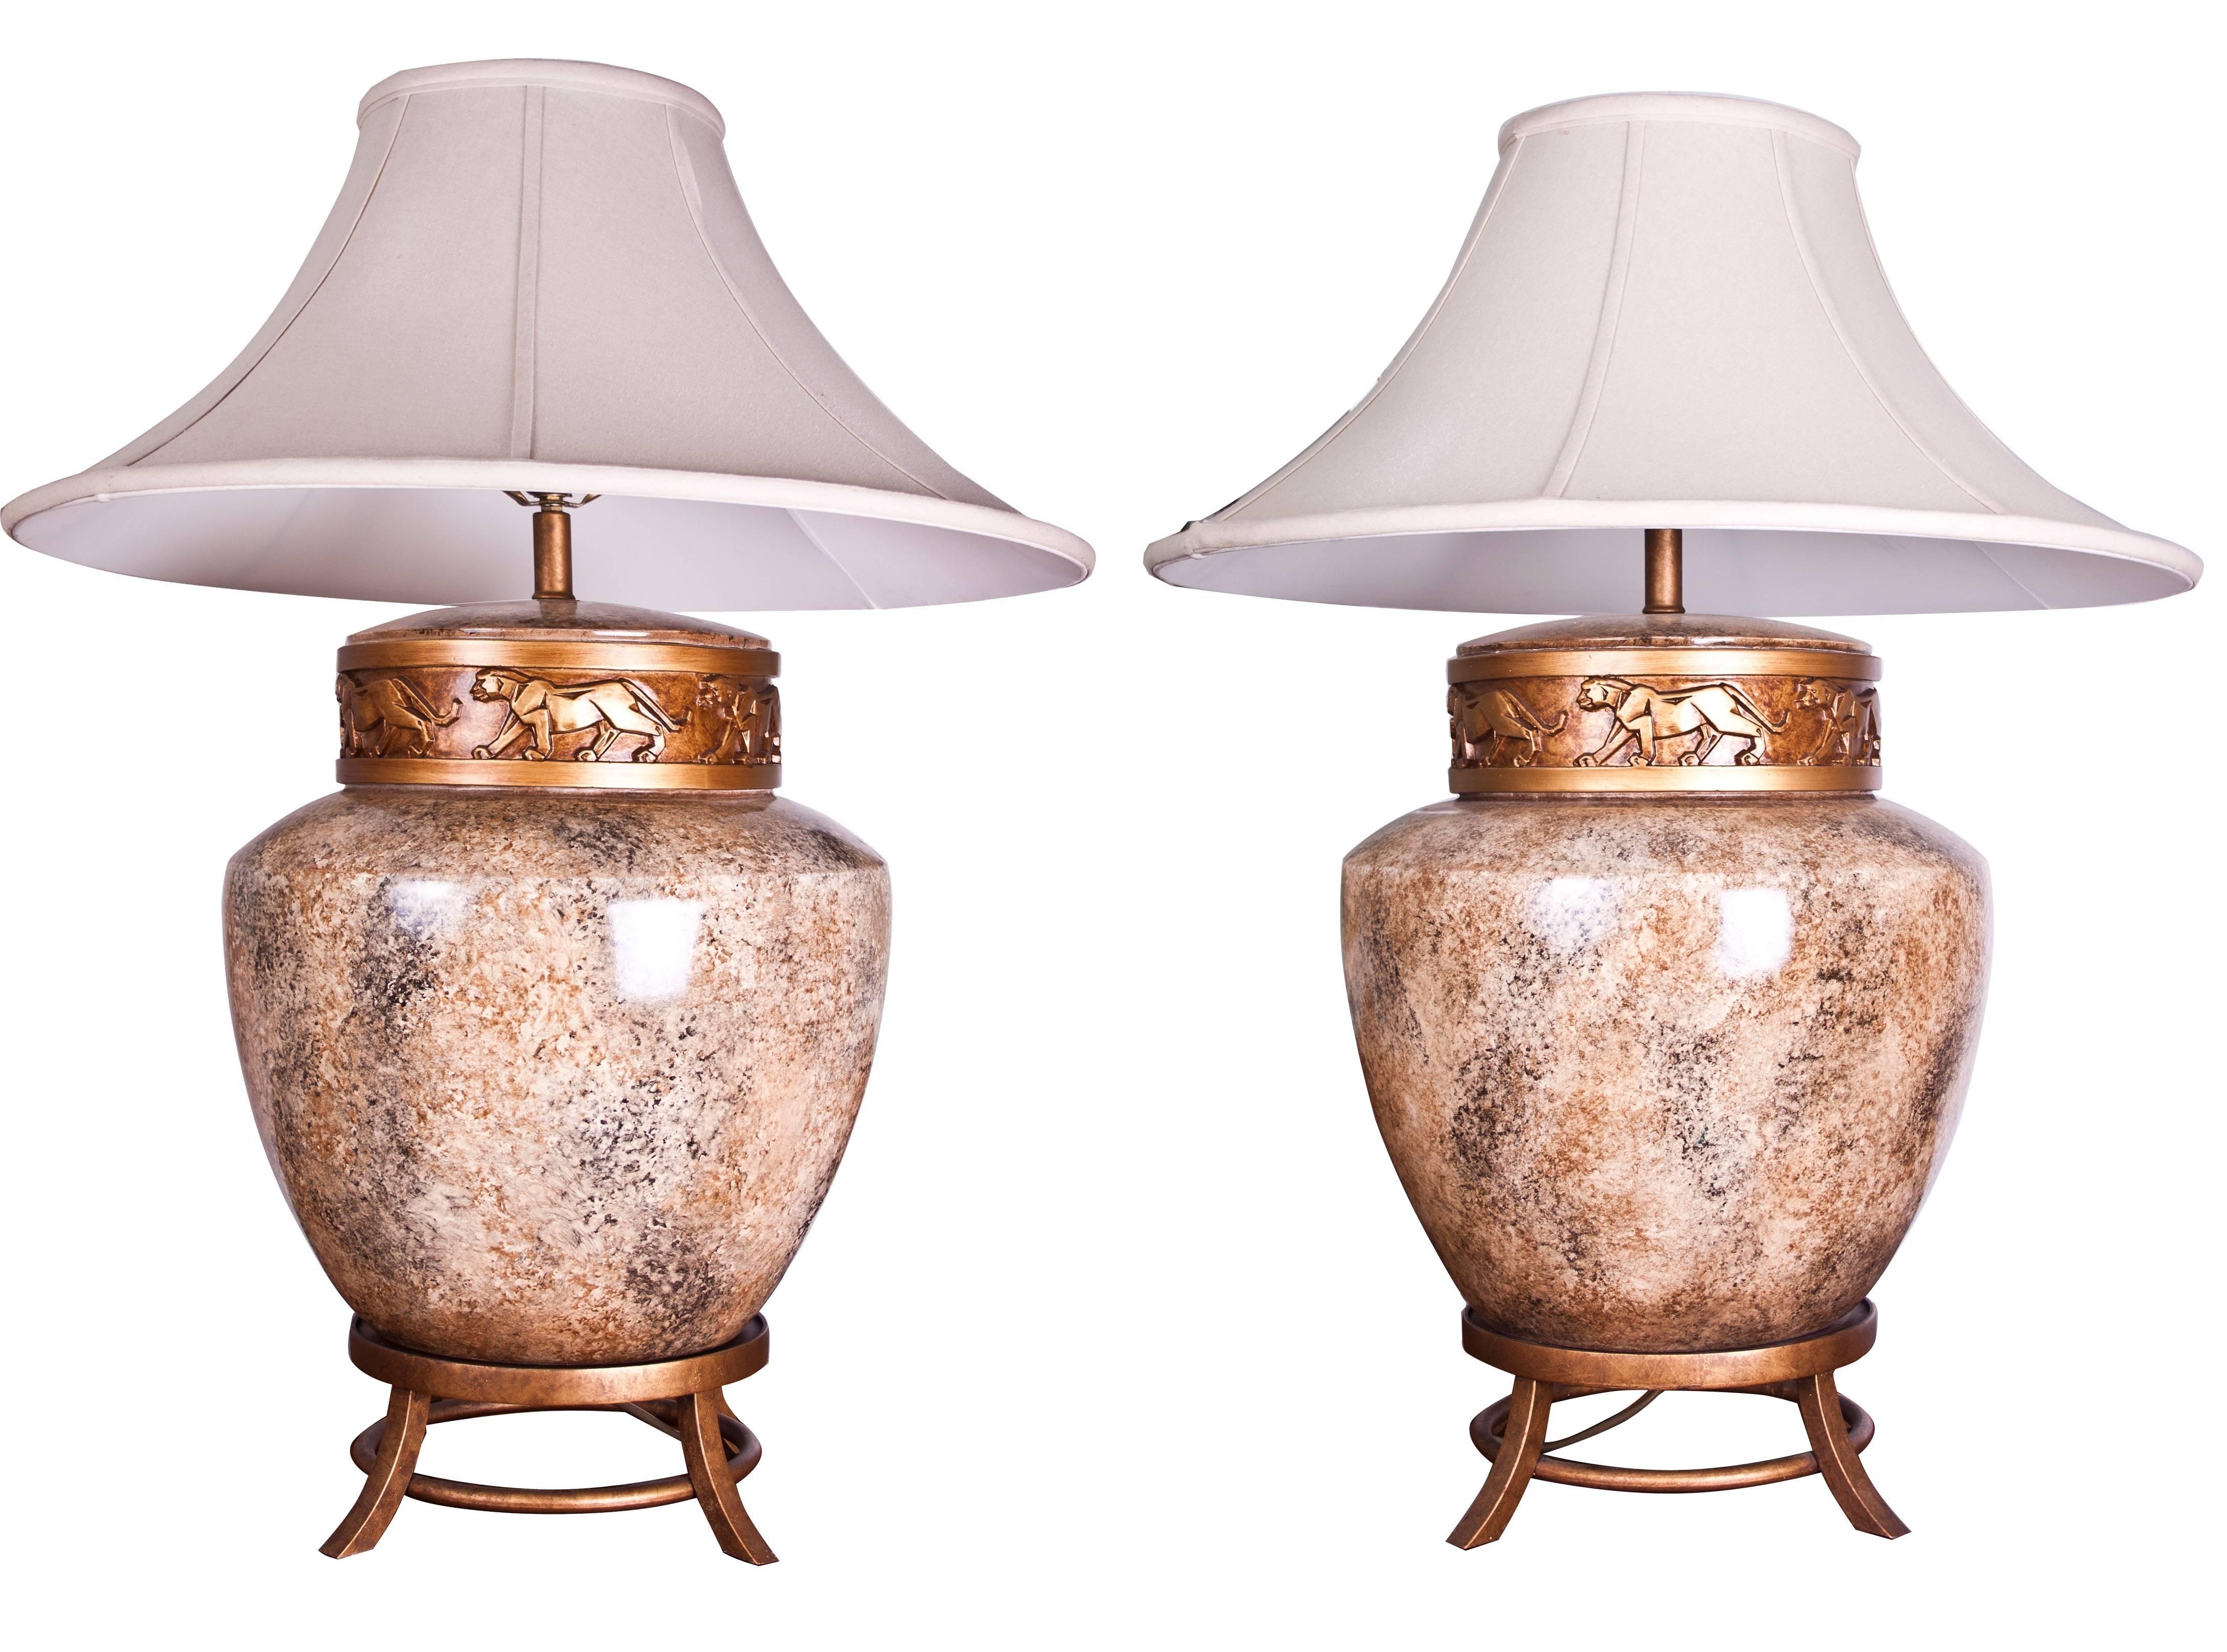 A large pair of Art Deco style lamps with a Chinese influence, bulbous mottled ceramic body raised on tripod base with a freeze of lions.
USA, circa 1980.
Measures: H 83 cm, W 45 cm, D 45 cm.